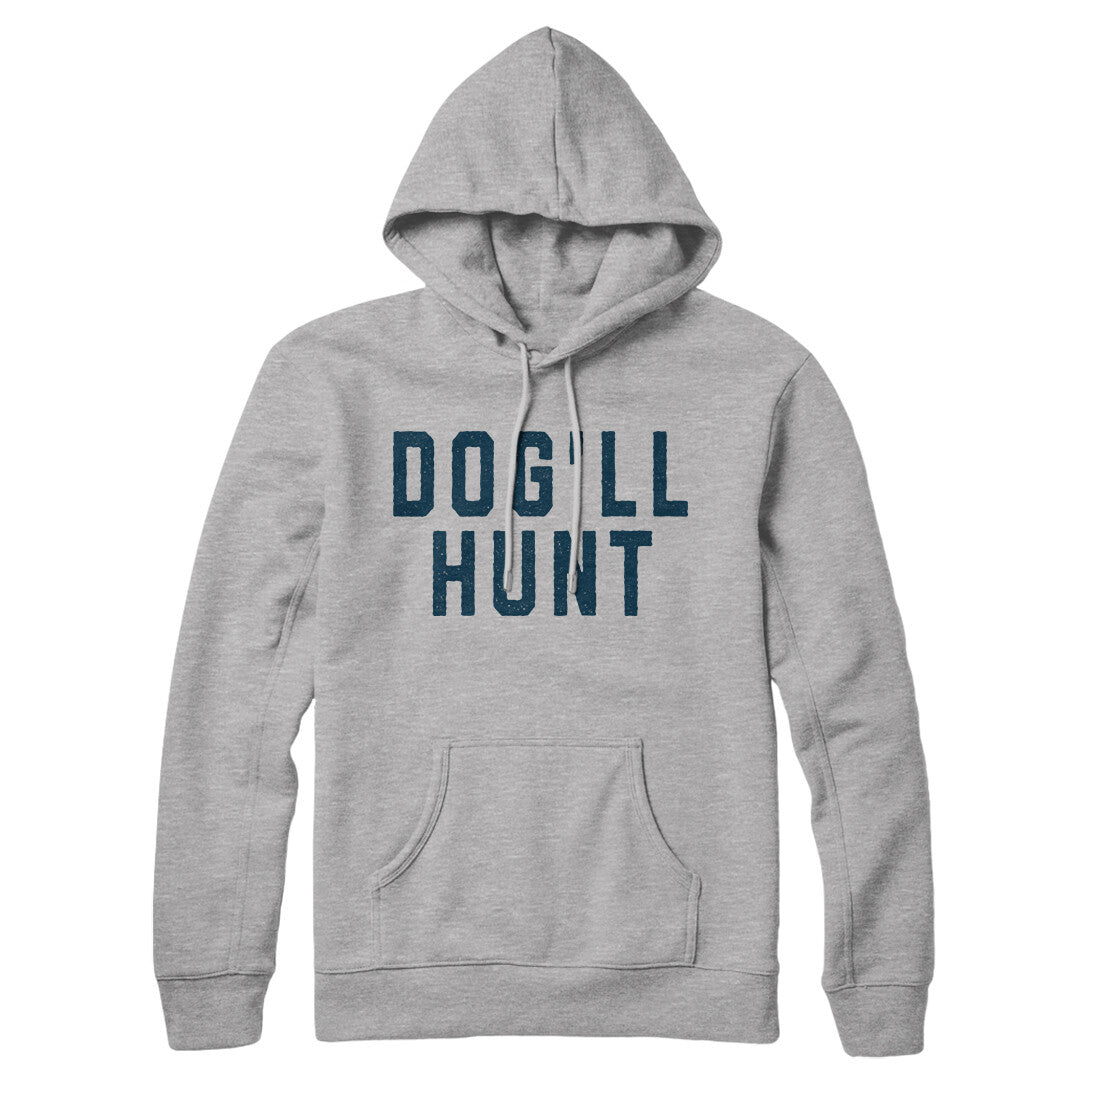 Dog’ll Hunt in Heather Grey Color